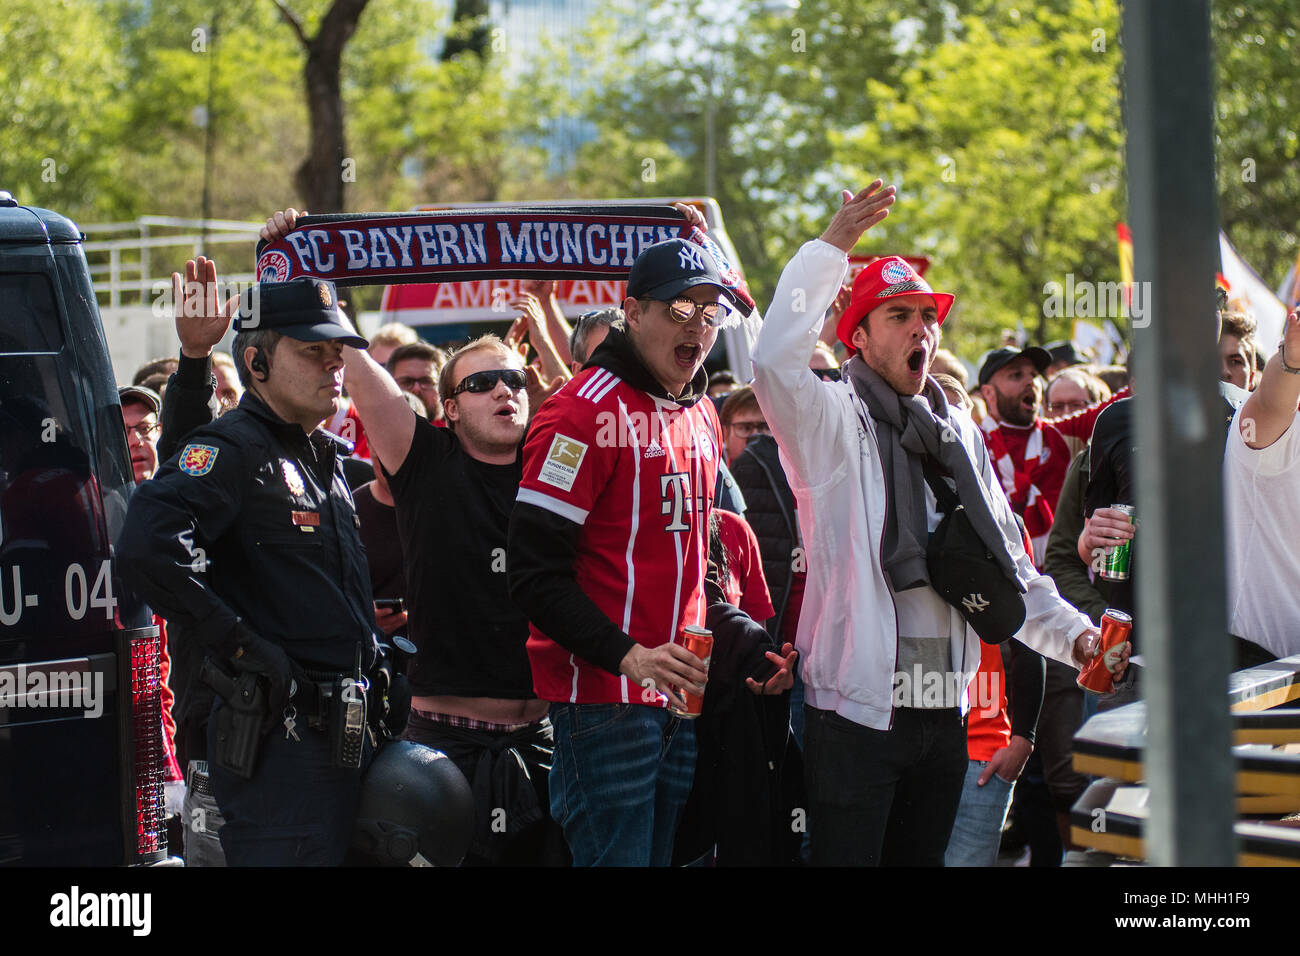 Madrid, Spain. 1st May, 2018. Bayern Munich fans in Santiago Bernabeu Stadium escorted by police ahead of Champions League match against Real Madrid, in Madrid, Spain. Credit: Marcos del Mazo/Alamy Live News Stock Photo